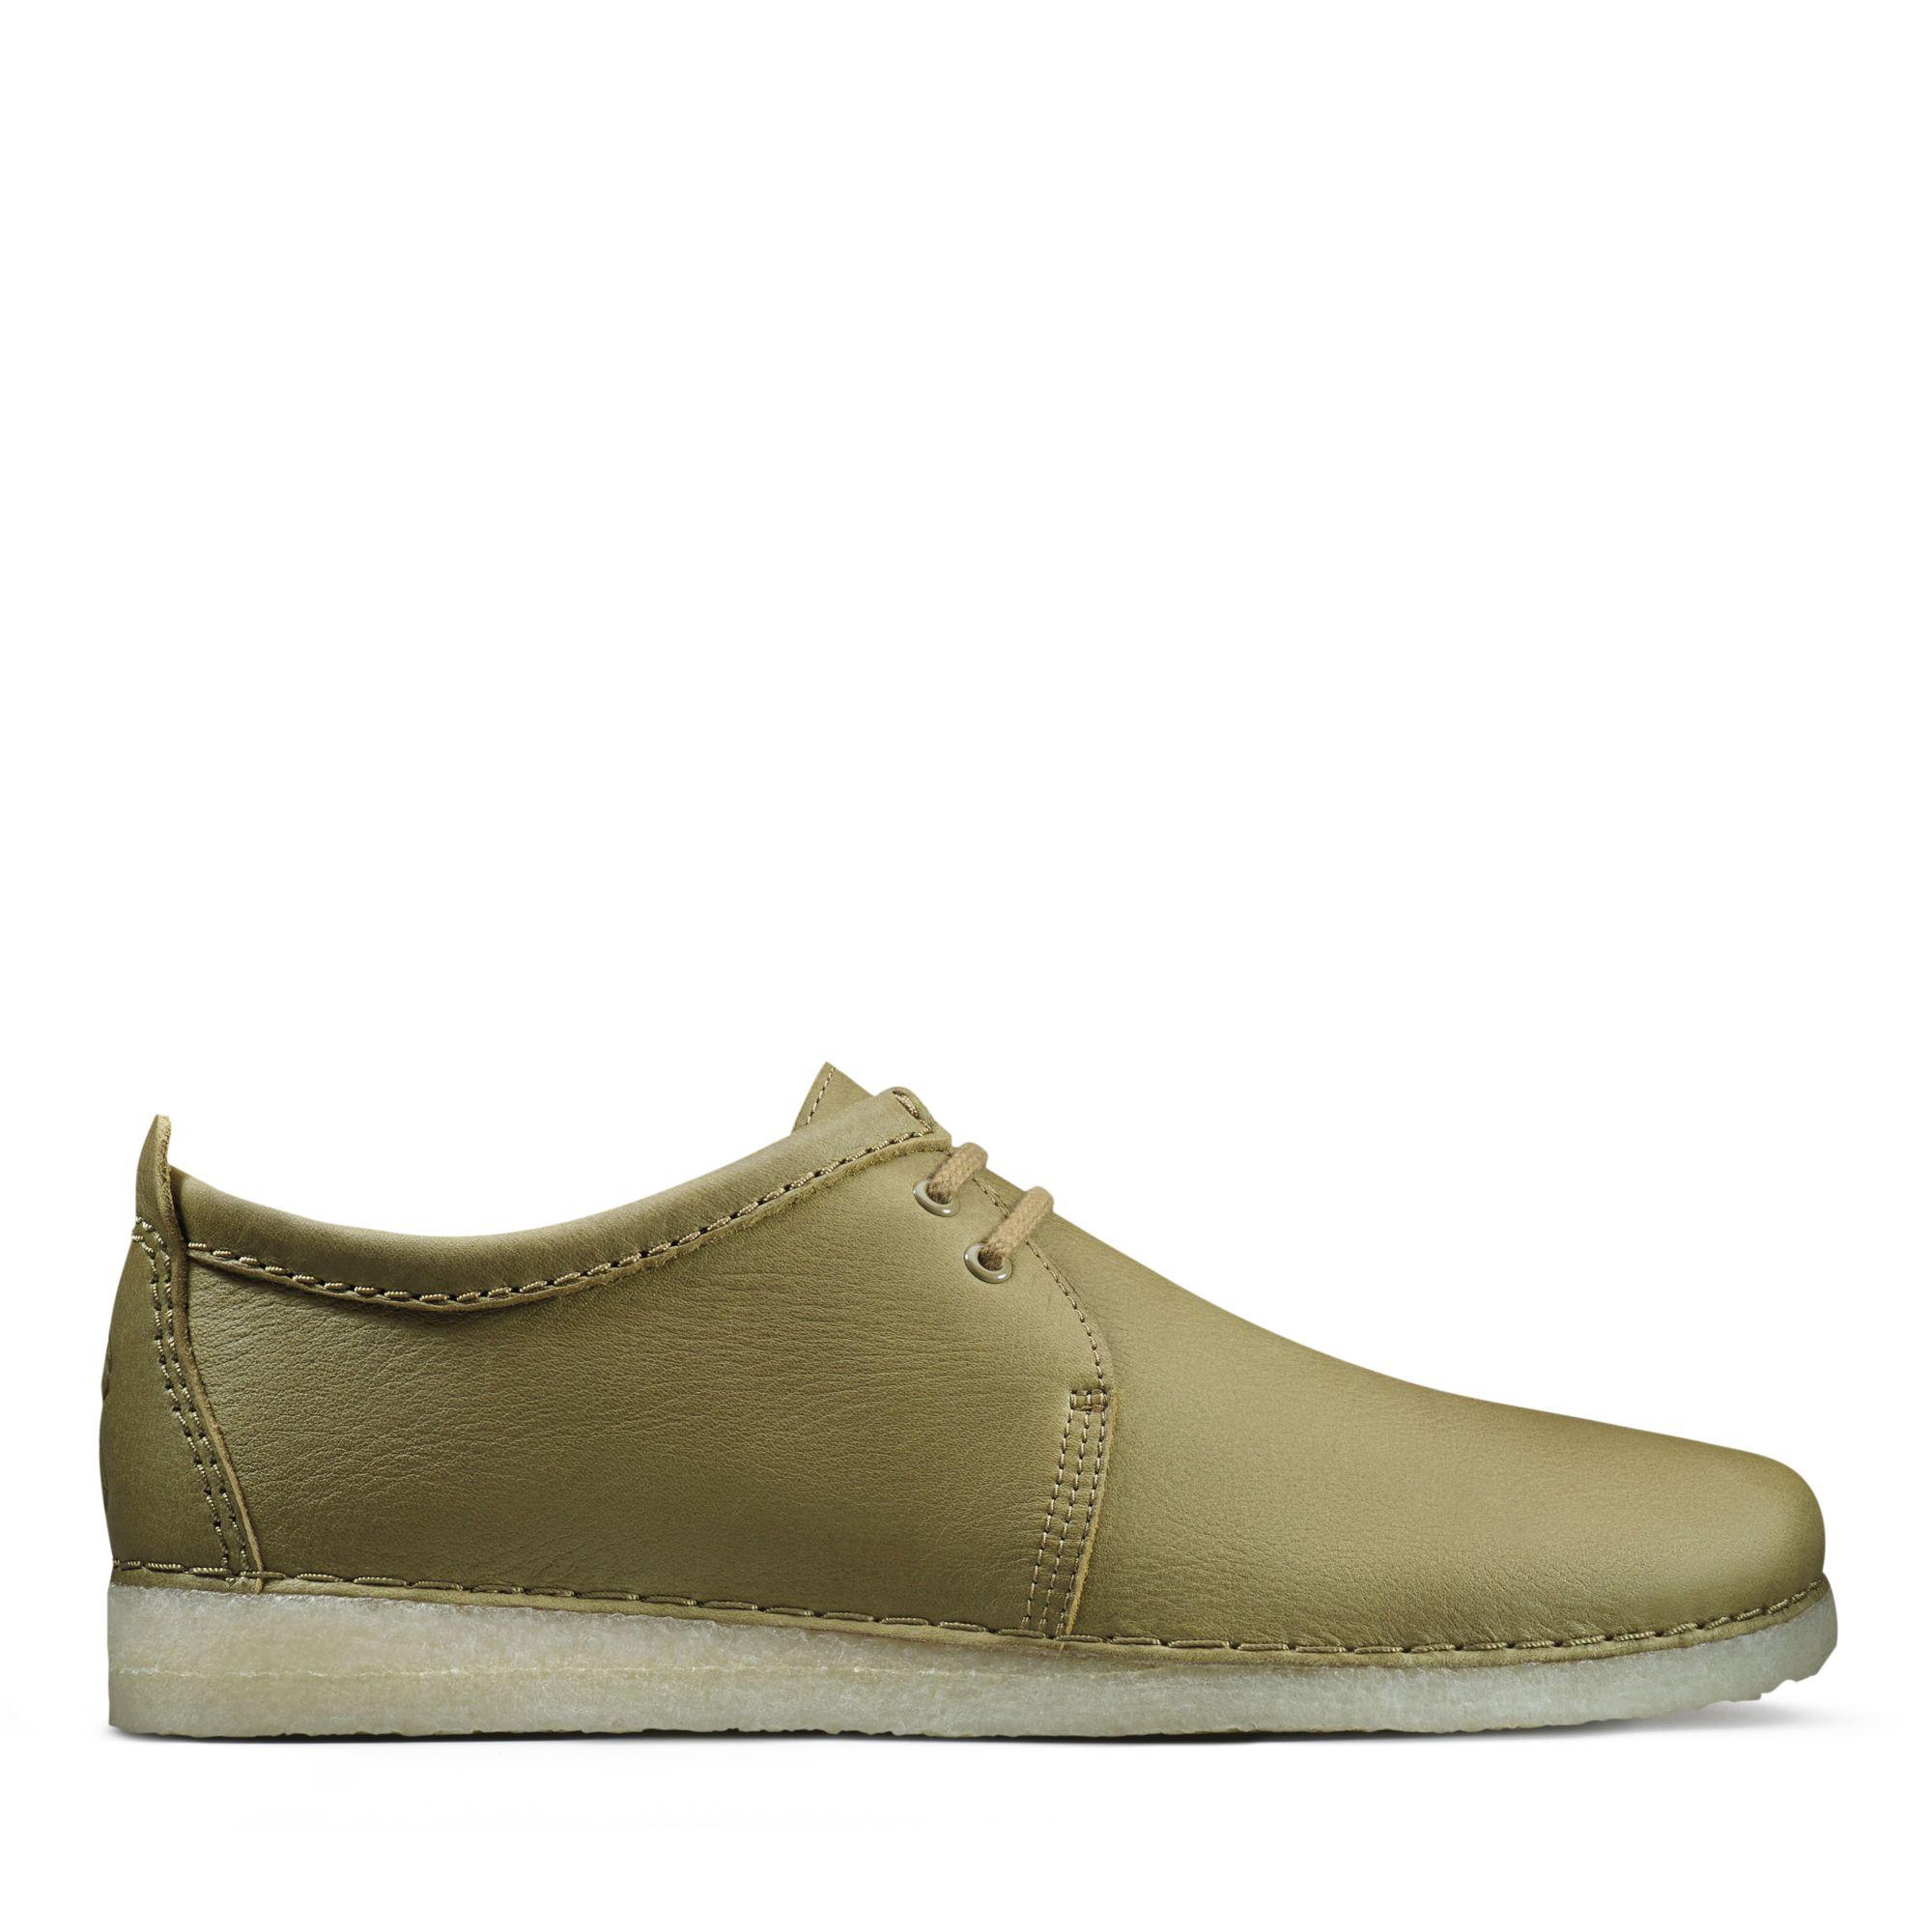 Clarks Ashton Leather Shoes - Olive in Olive Leather (Green) for Men - Lyst